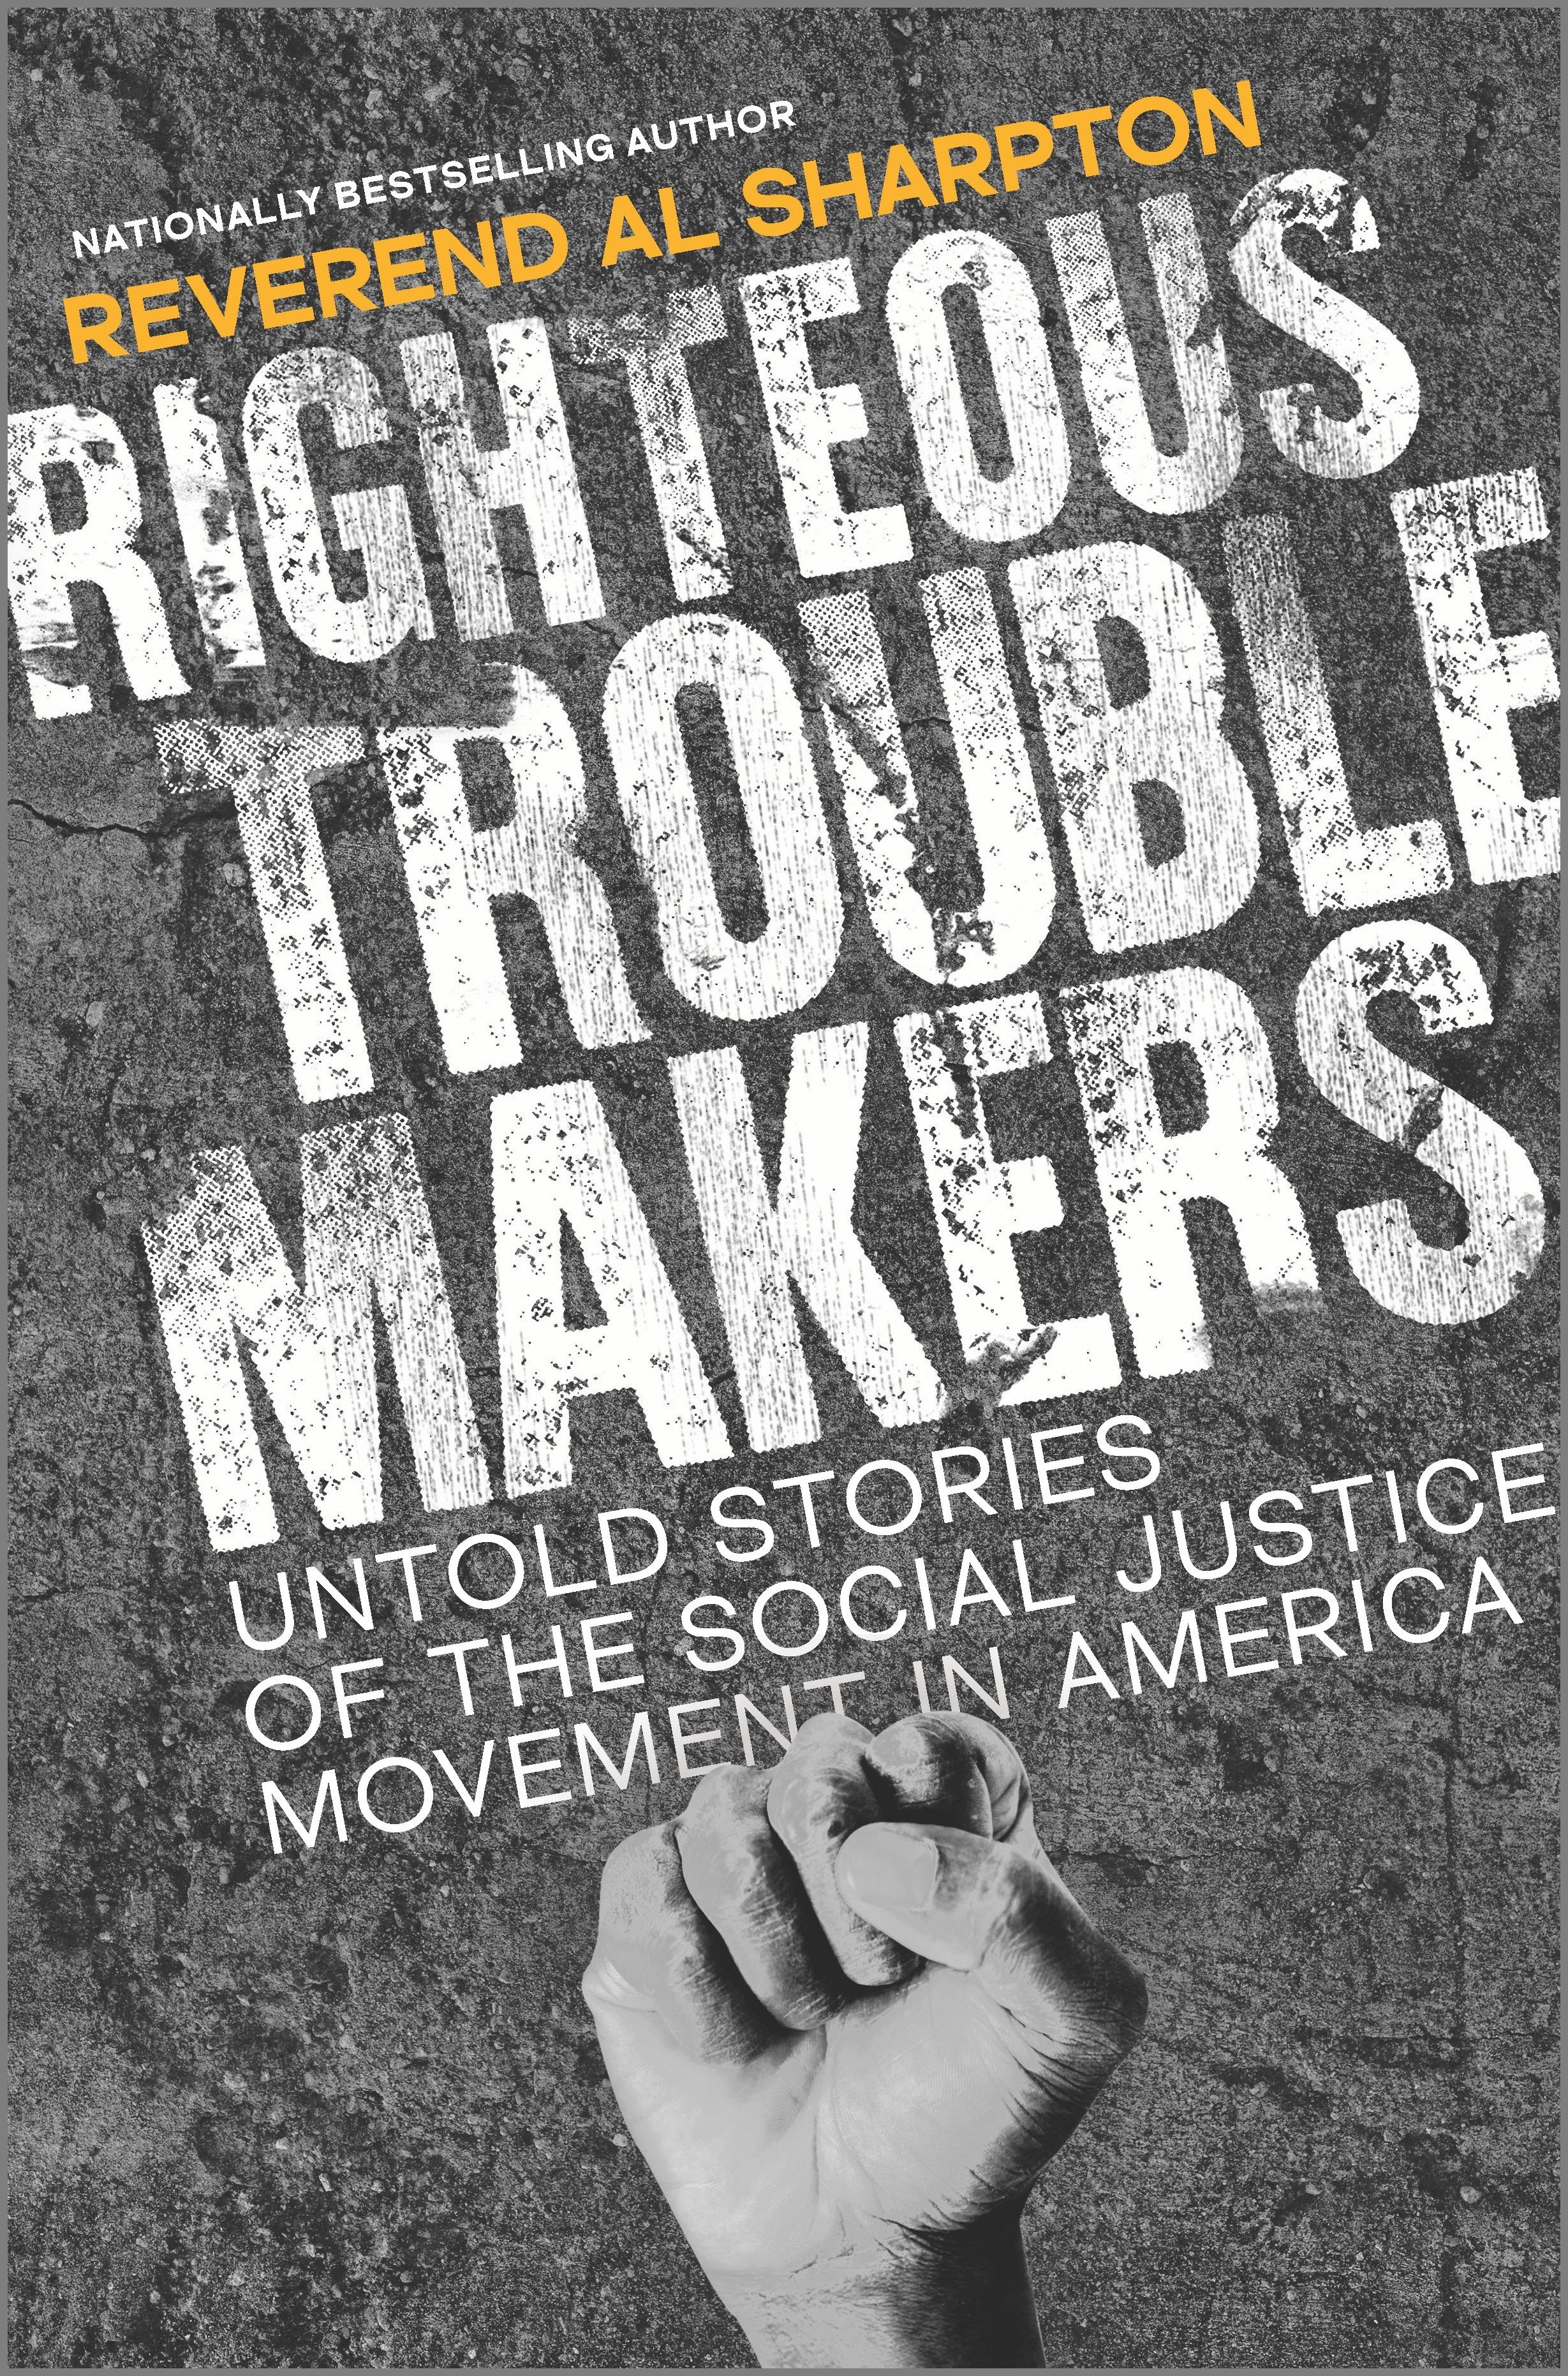 Righteous Troublemakers by Al Sharpton